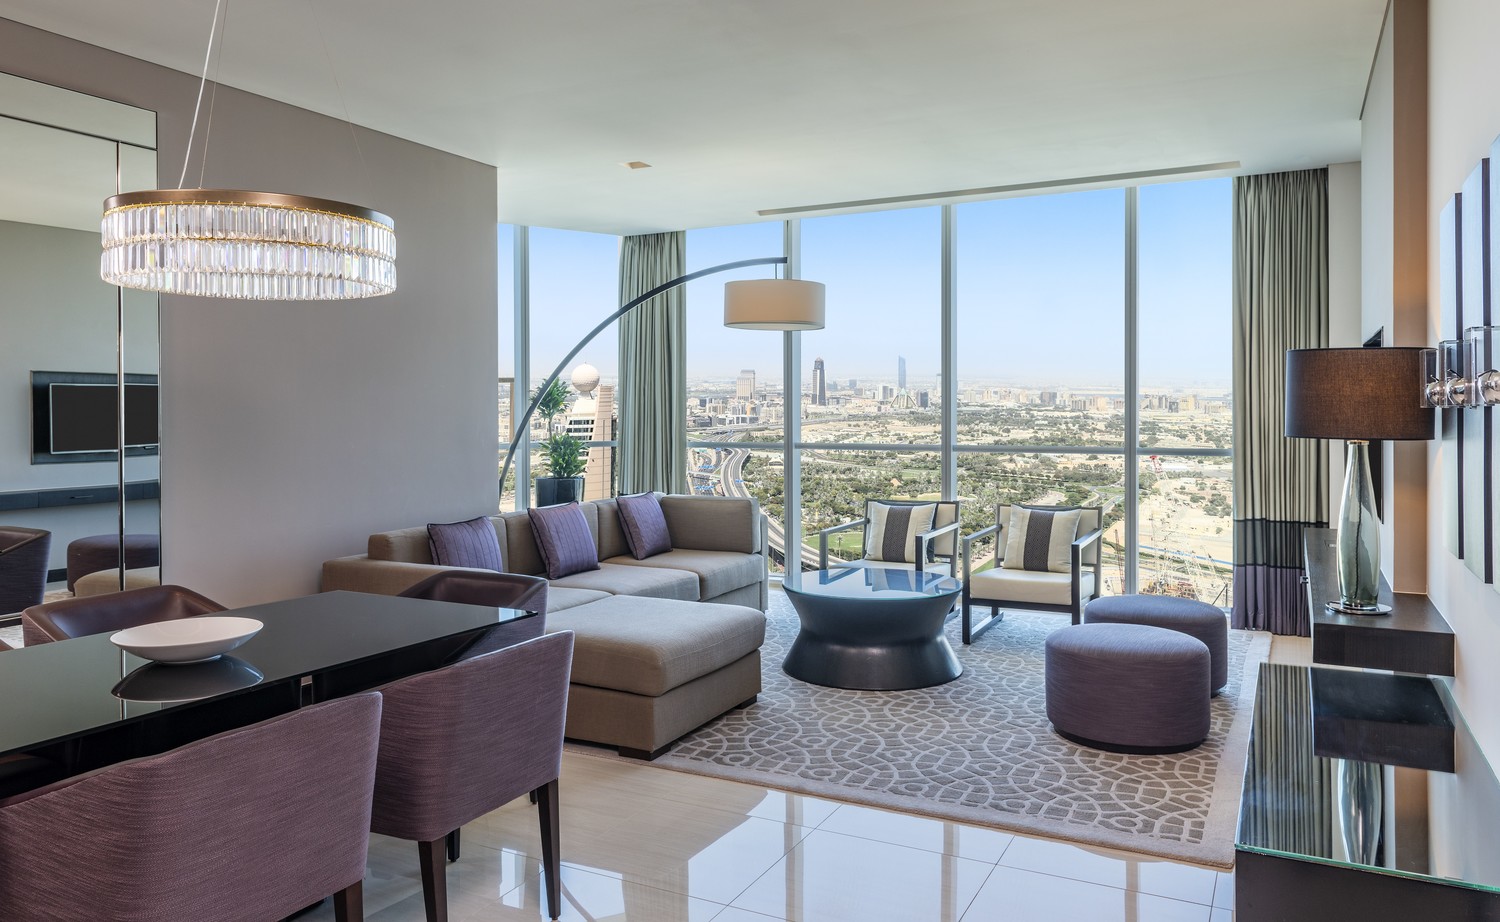 1, 2 and 3-bedroom apartments located in the heart of Dubai.